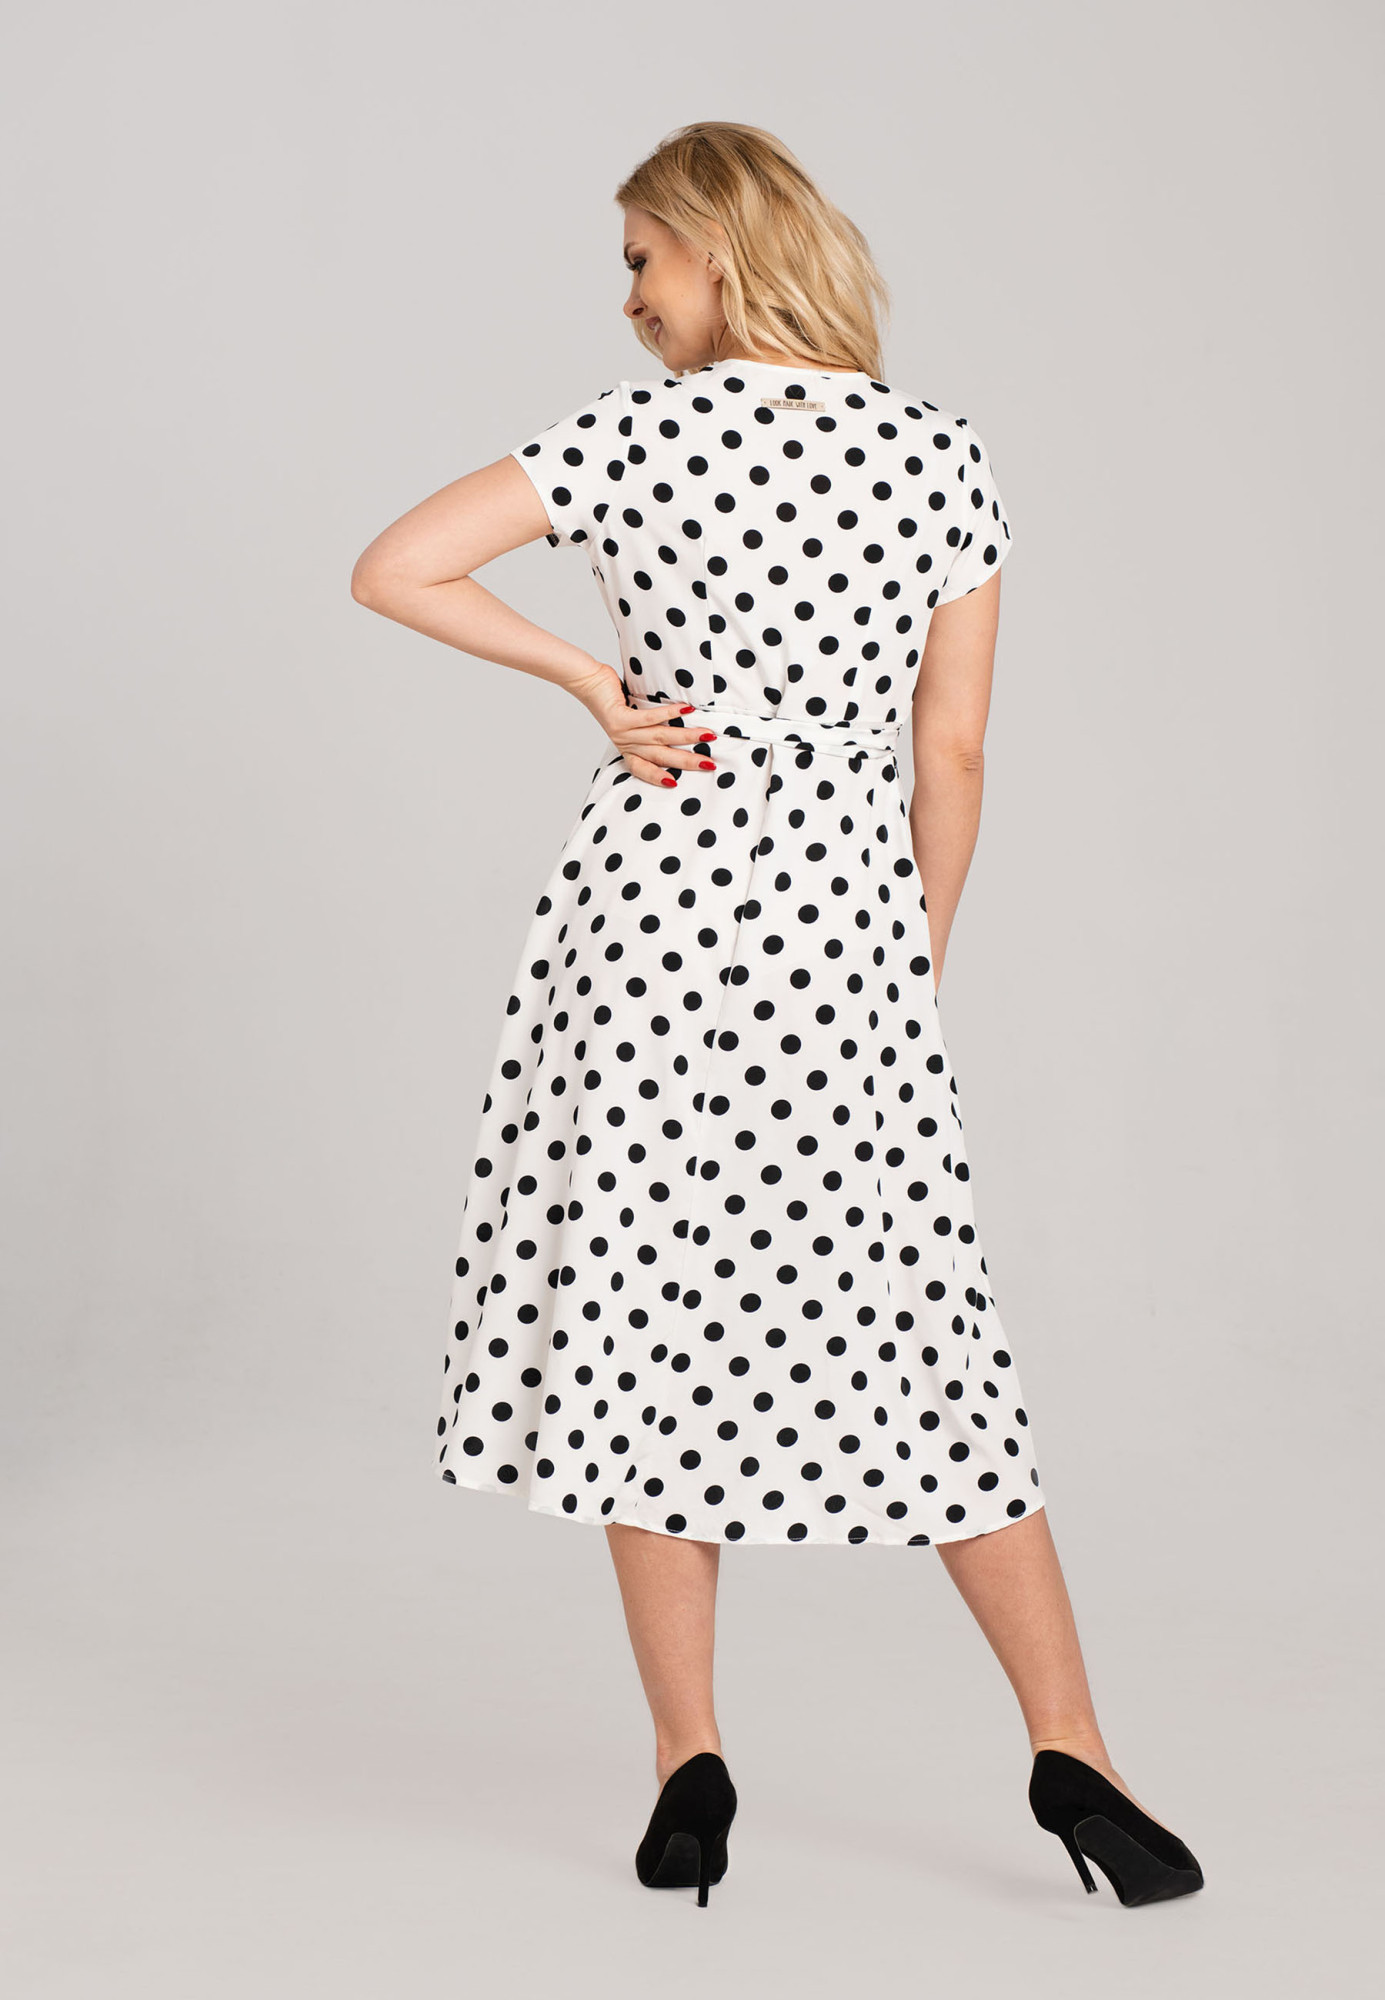 Look Made With Love Šaty N20 Polka Dots Black/White L